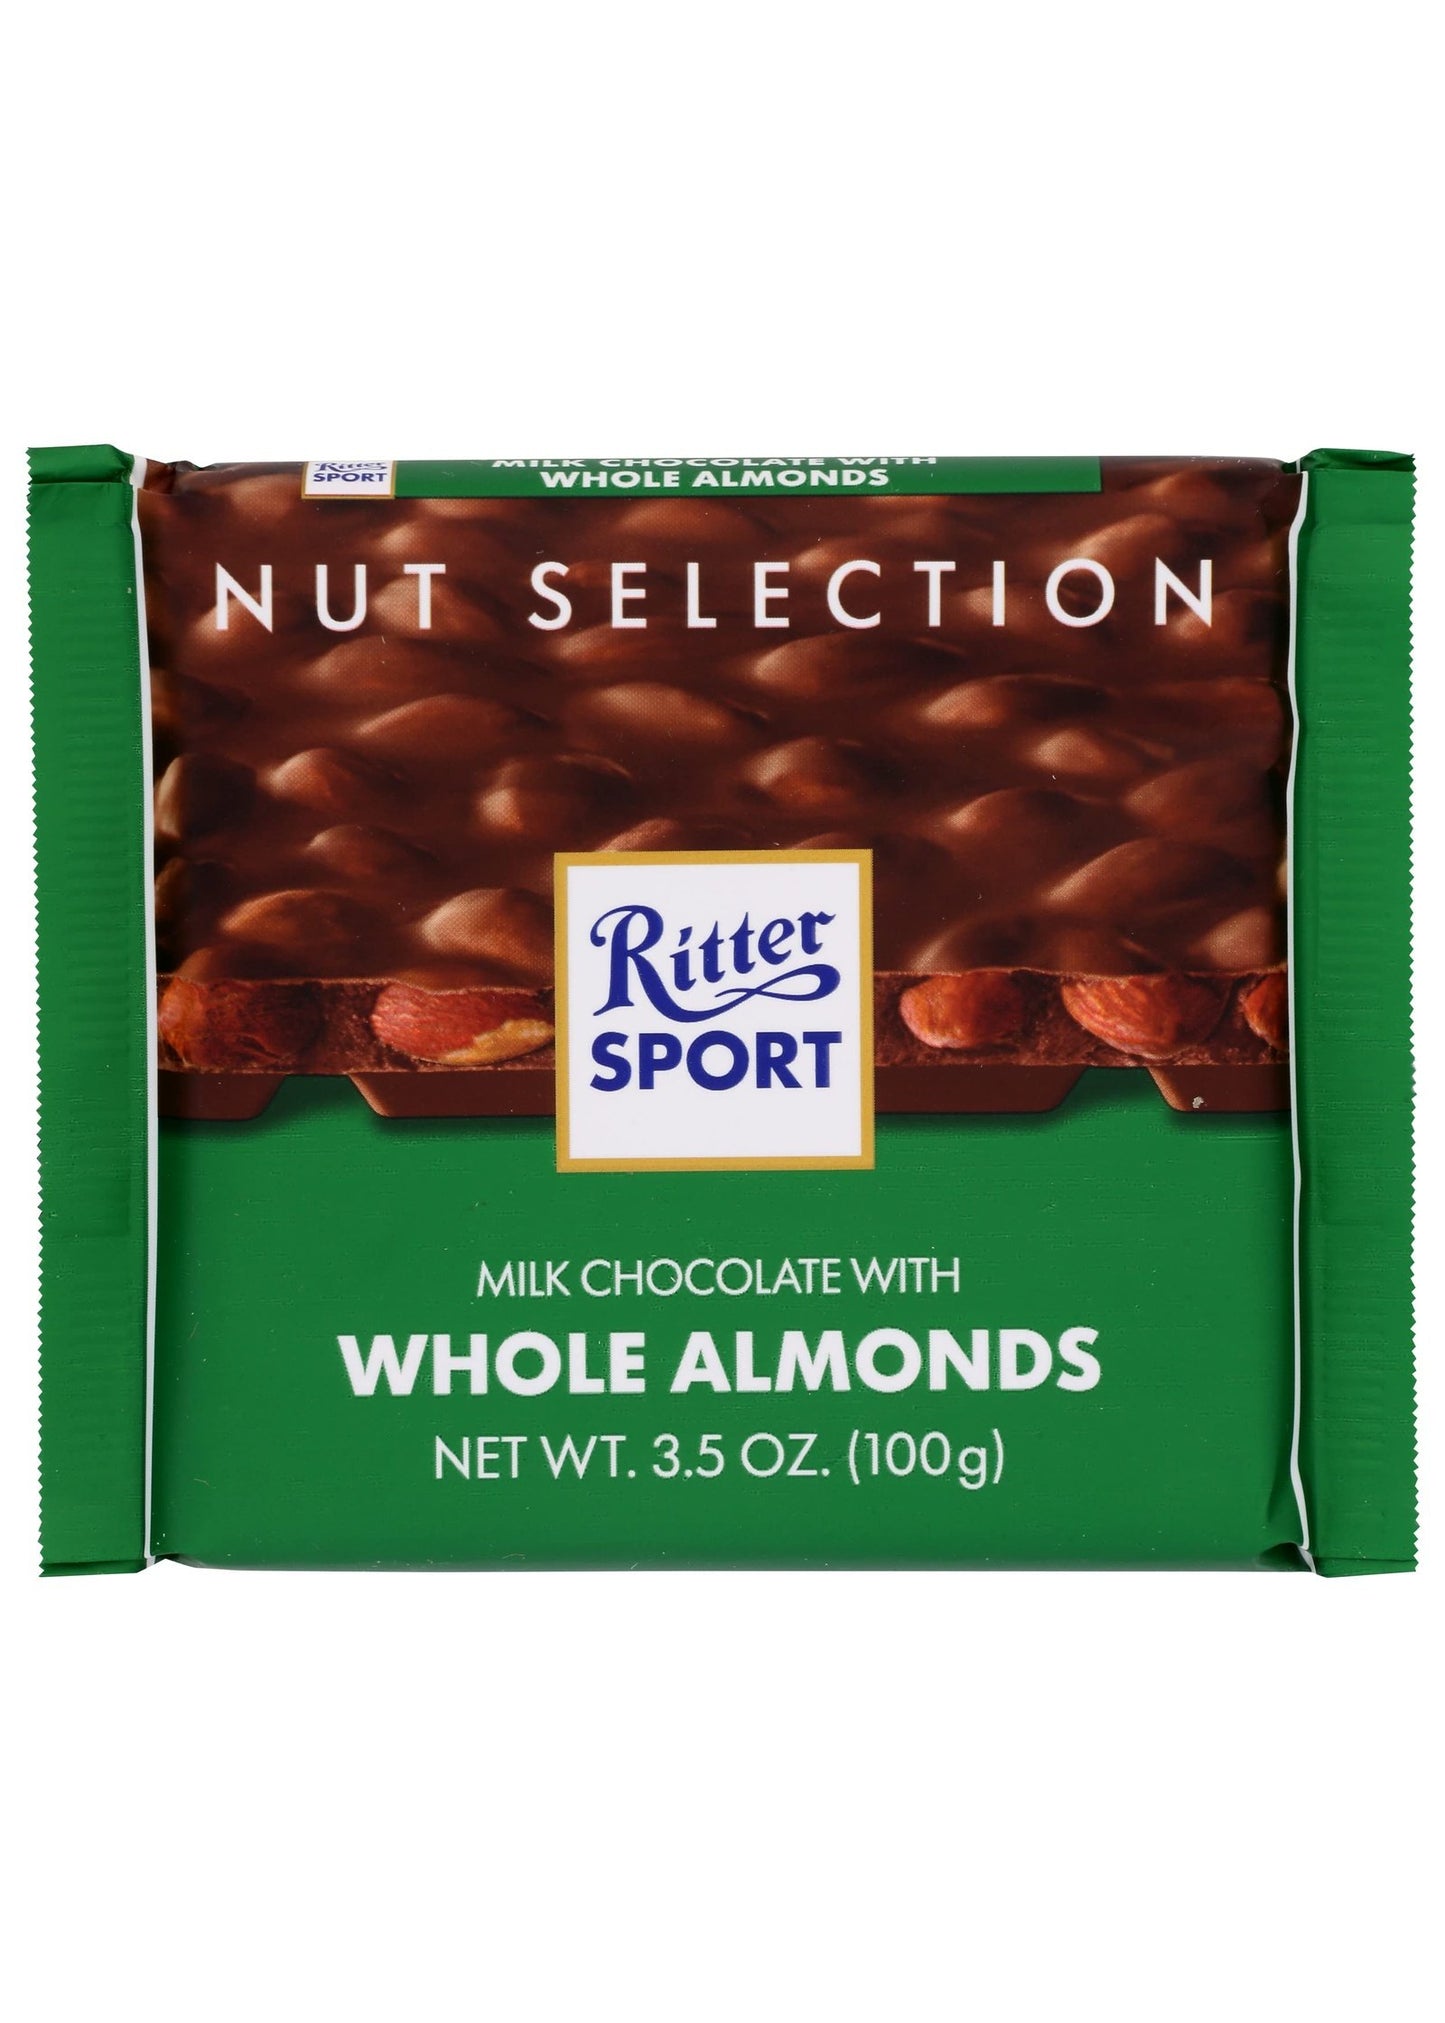 RITTER SPORT Milk Chocolate With Whole Almonds